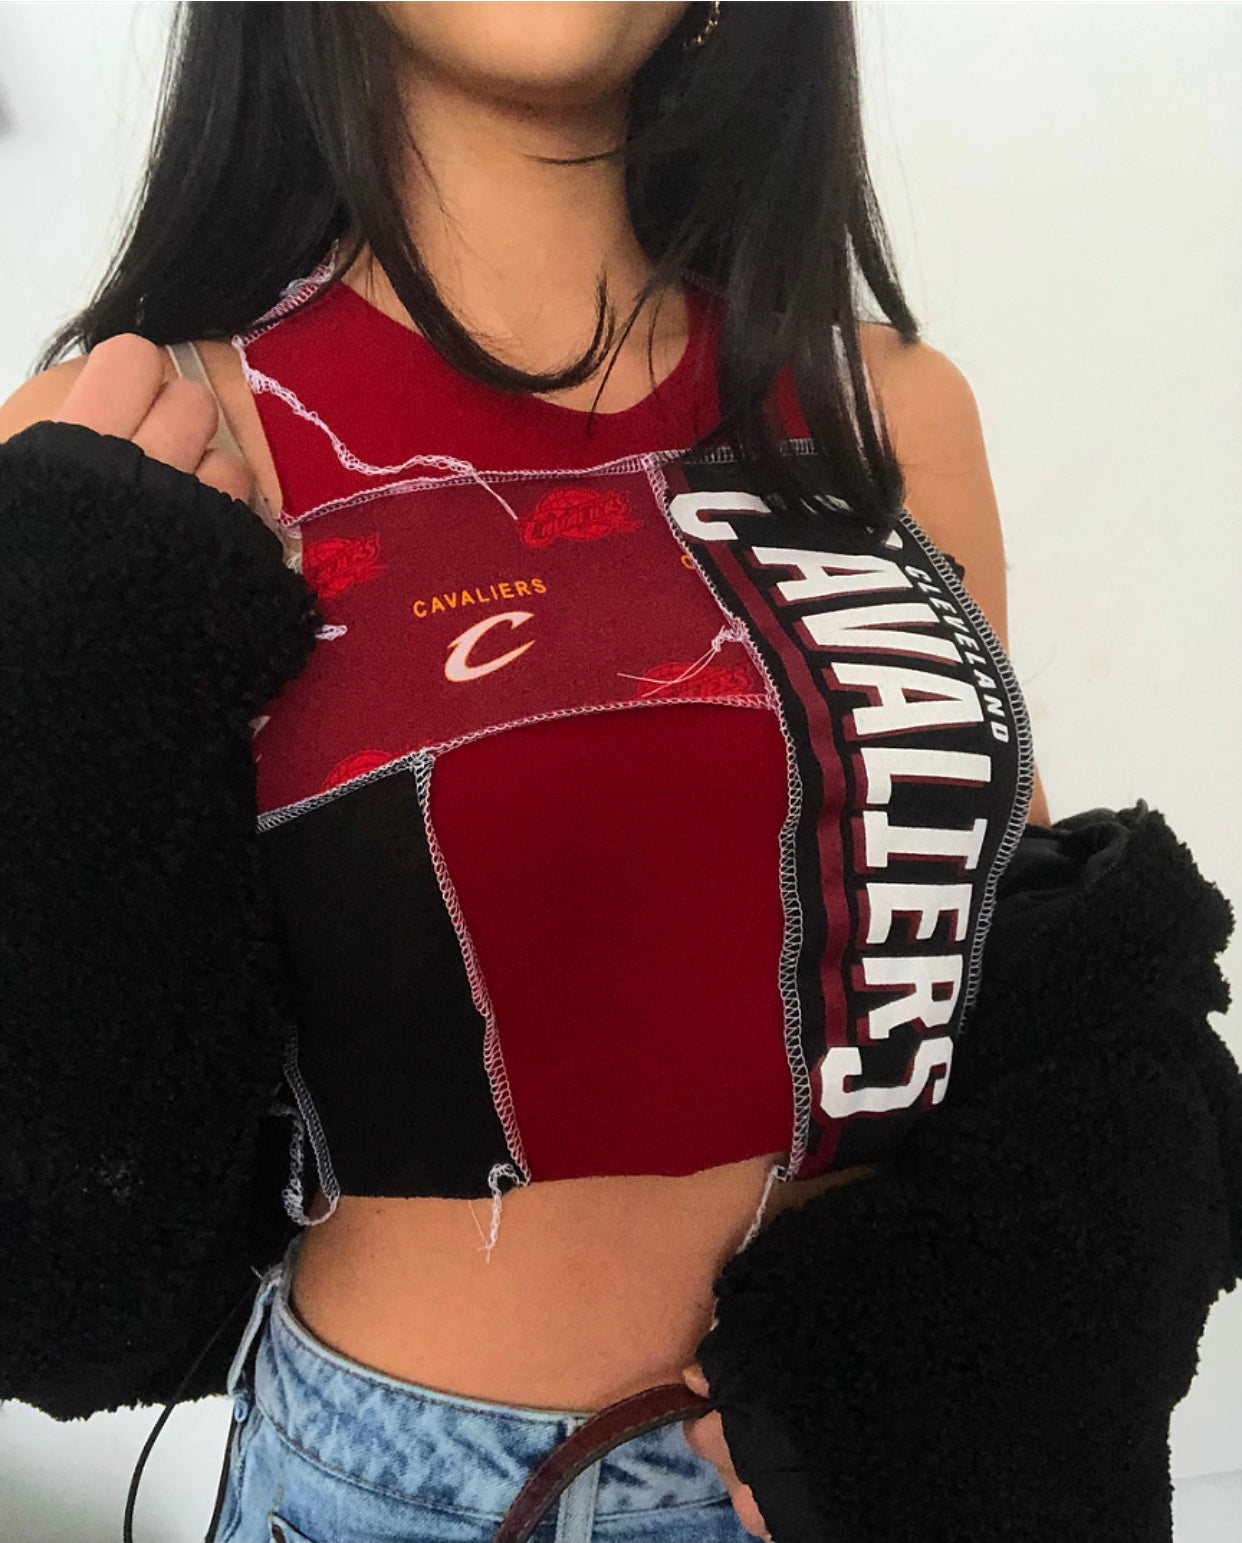 CAVS BLACK AND MAROON PATCHWORK TANK